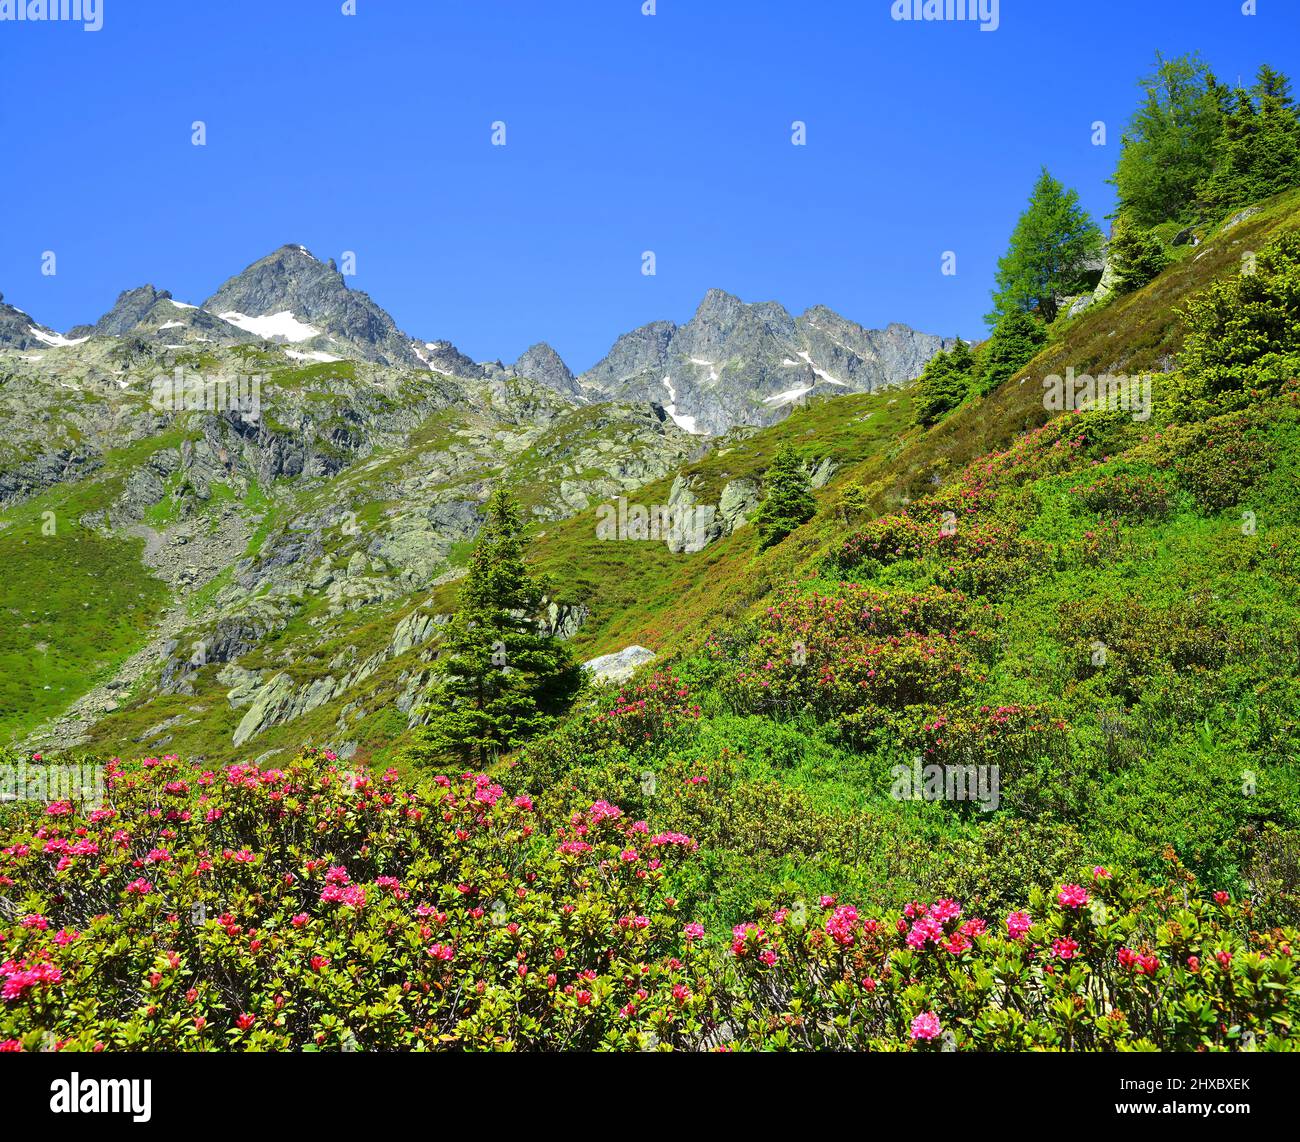 Mountain landscape in the Nature Reserve Aiguilles Rouges, Graian Alps, France, Europe. Stock Photo